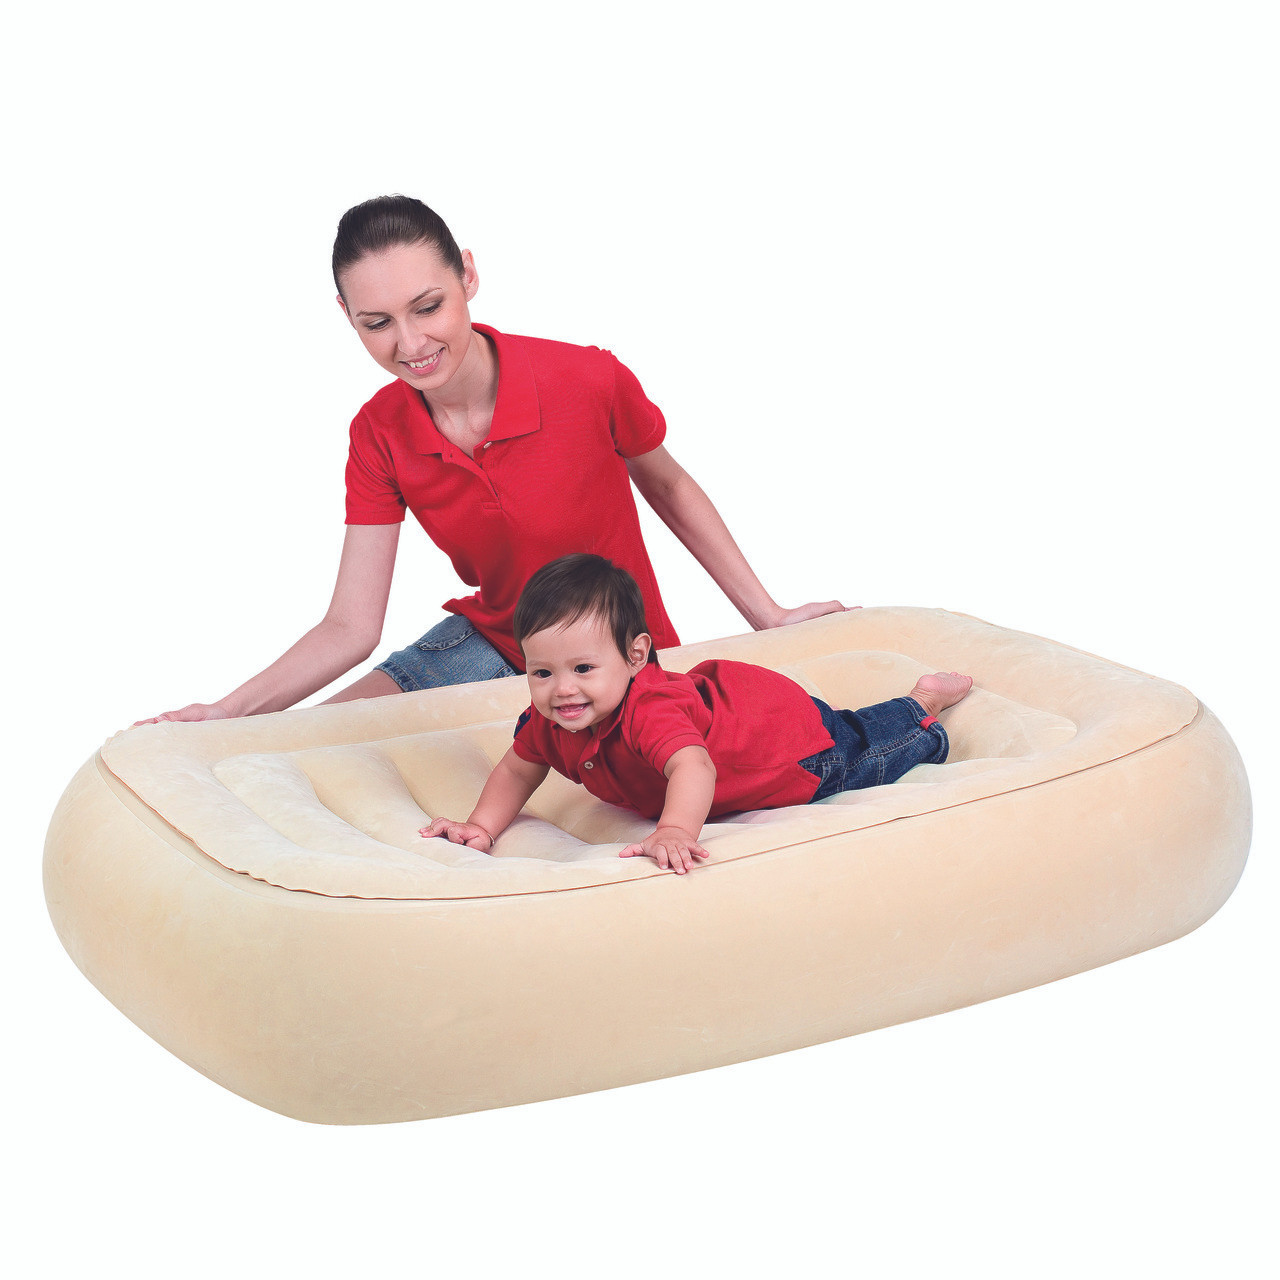 An image of Children's Air Bed